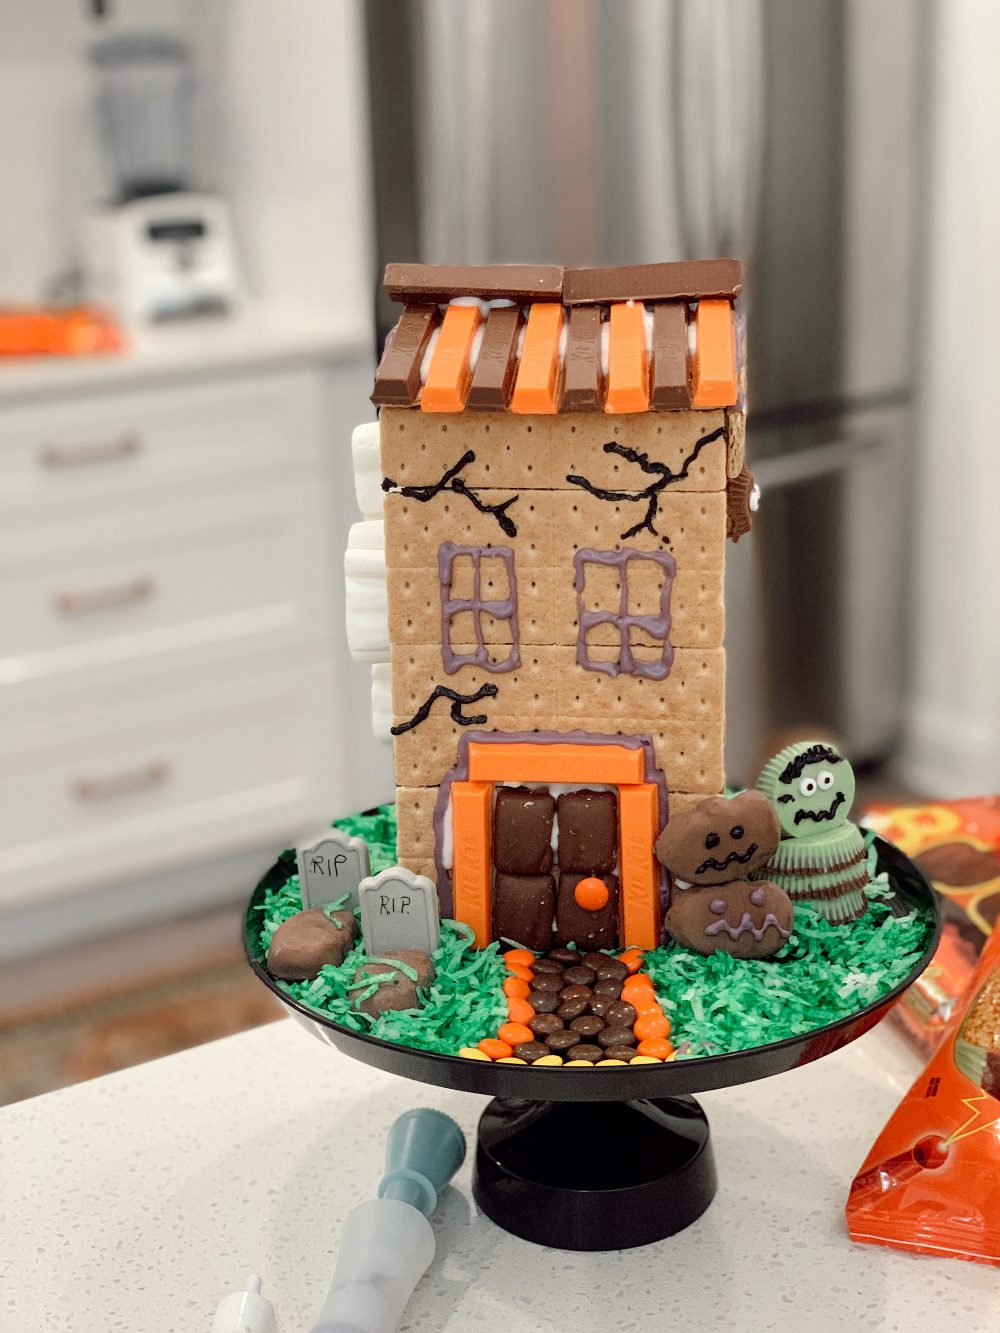 How to make easy, no-bake Haunted Halloween Candy Gingerbread House with Graham Crackers for a Spooktacular Halloween!